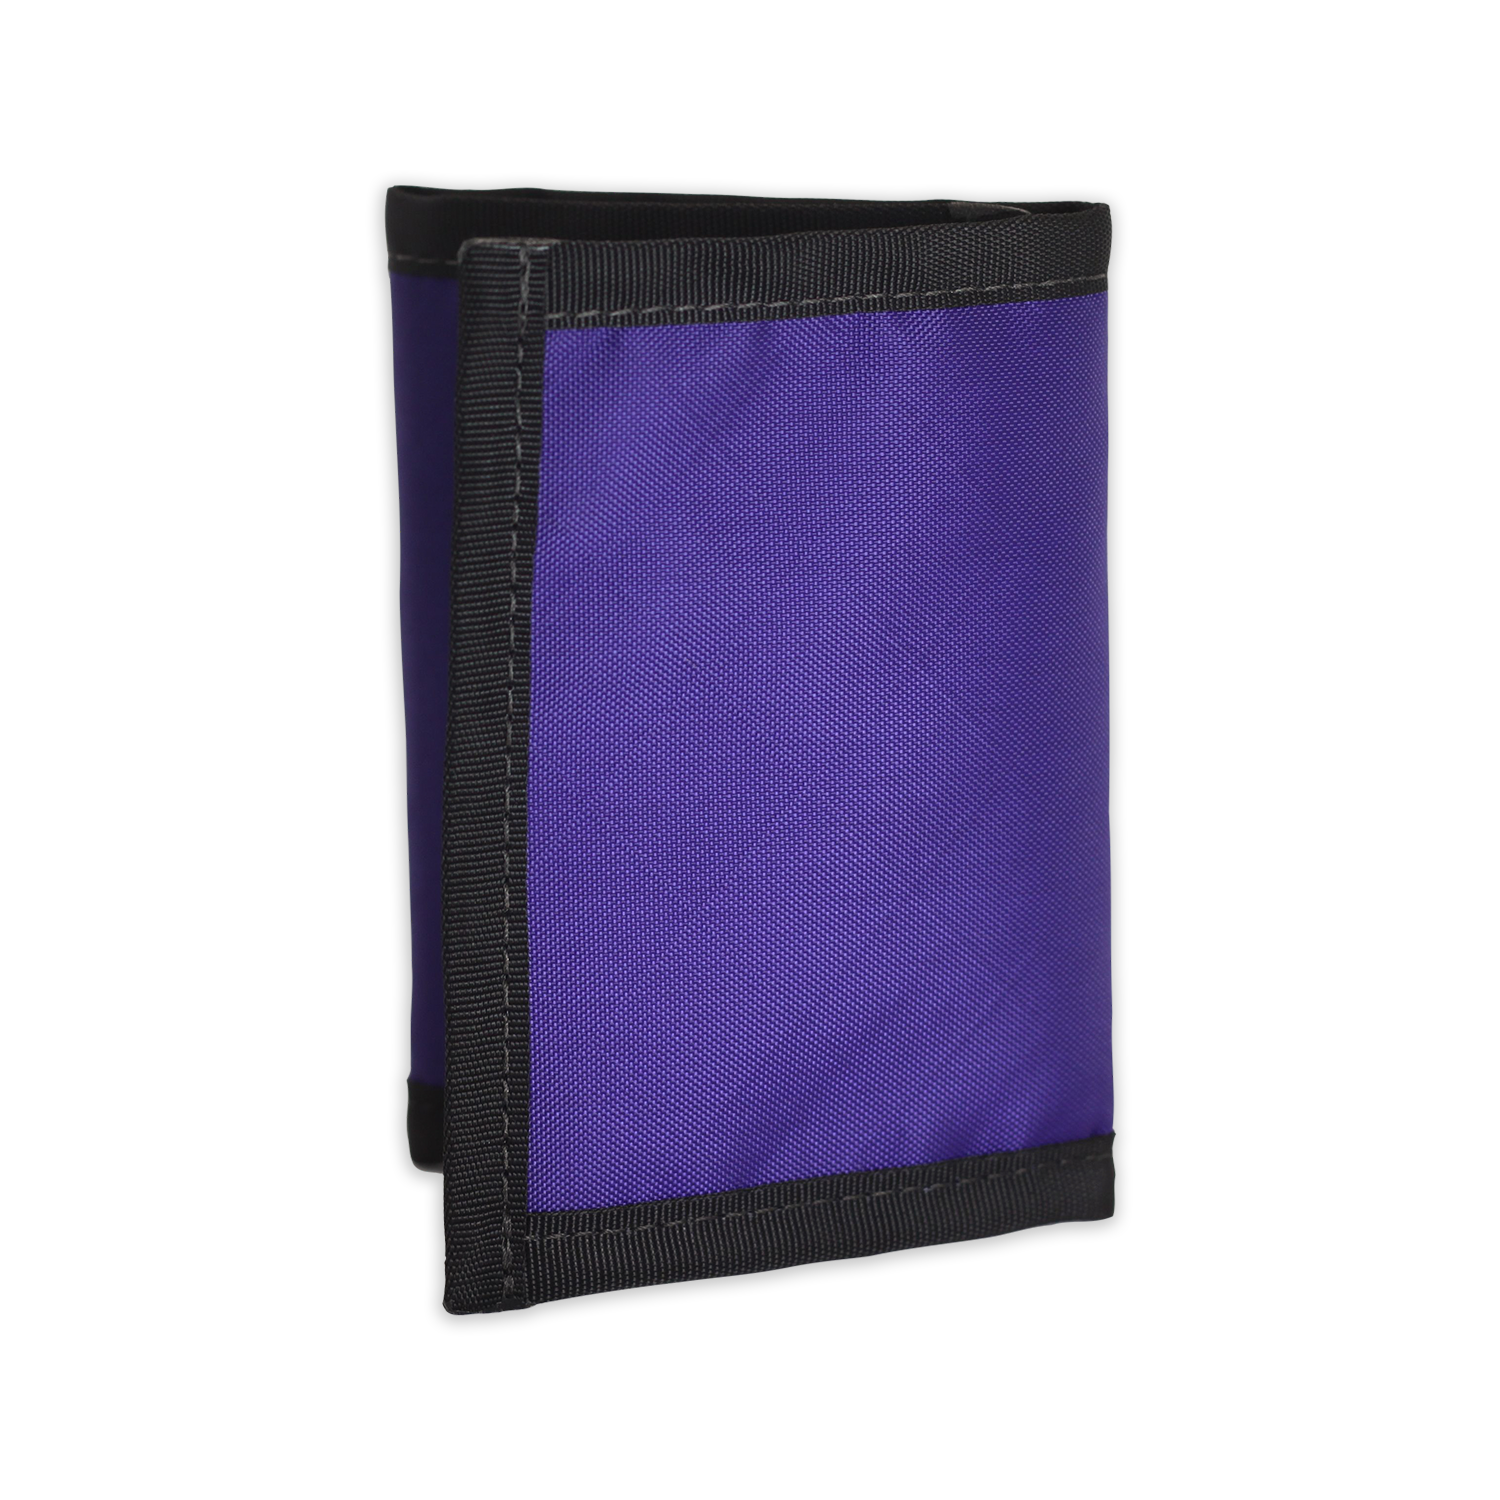 Flowfold Traveler Trifold Wallet Recycled Wallet of 100% Recycled Polyester EcoPak Purple